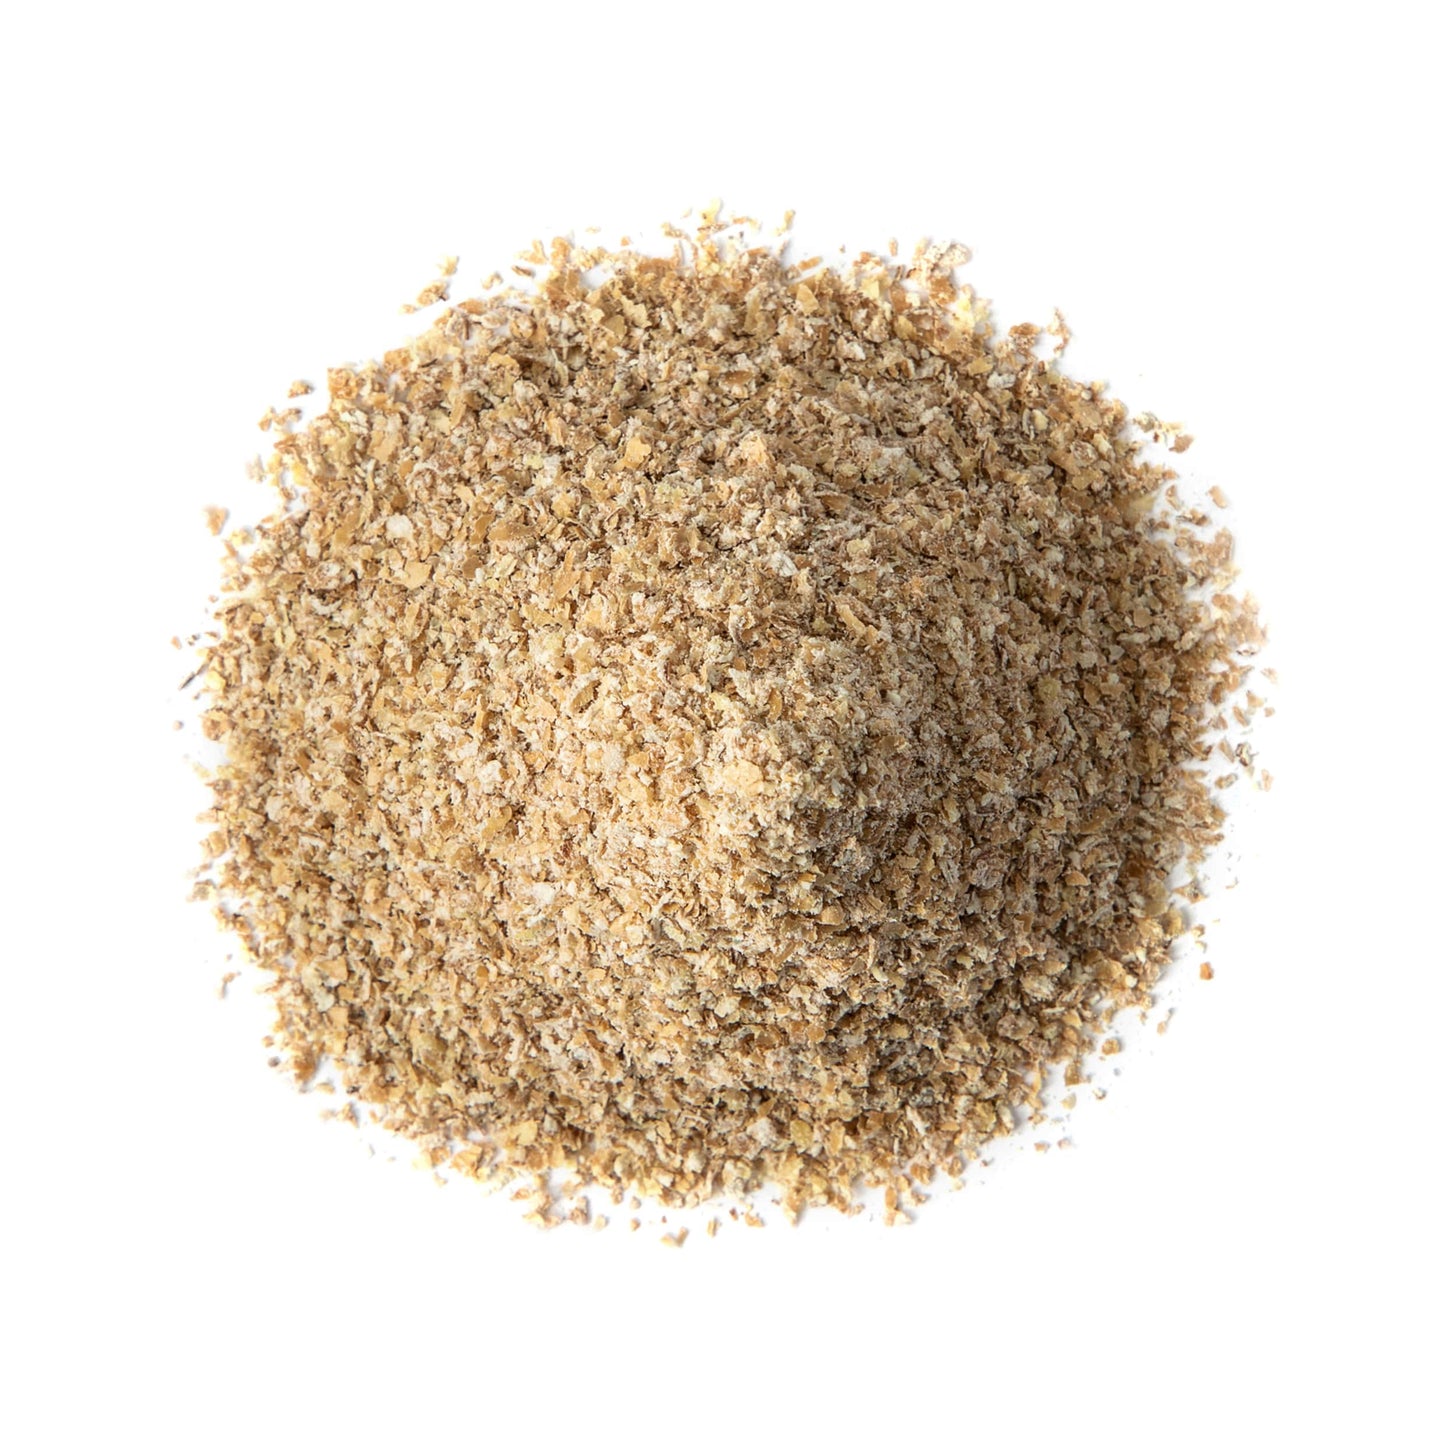 Organic Red Wheat Bran – Non-GMO, Milled Outer Layer of Hard Red Wheat Berries, Unprocessed, Vegan, Kosher, Bulk. High in Dietary Fiber. Perfect for Hot Cereals, Muffins, and Baked Goods